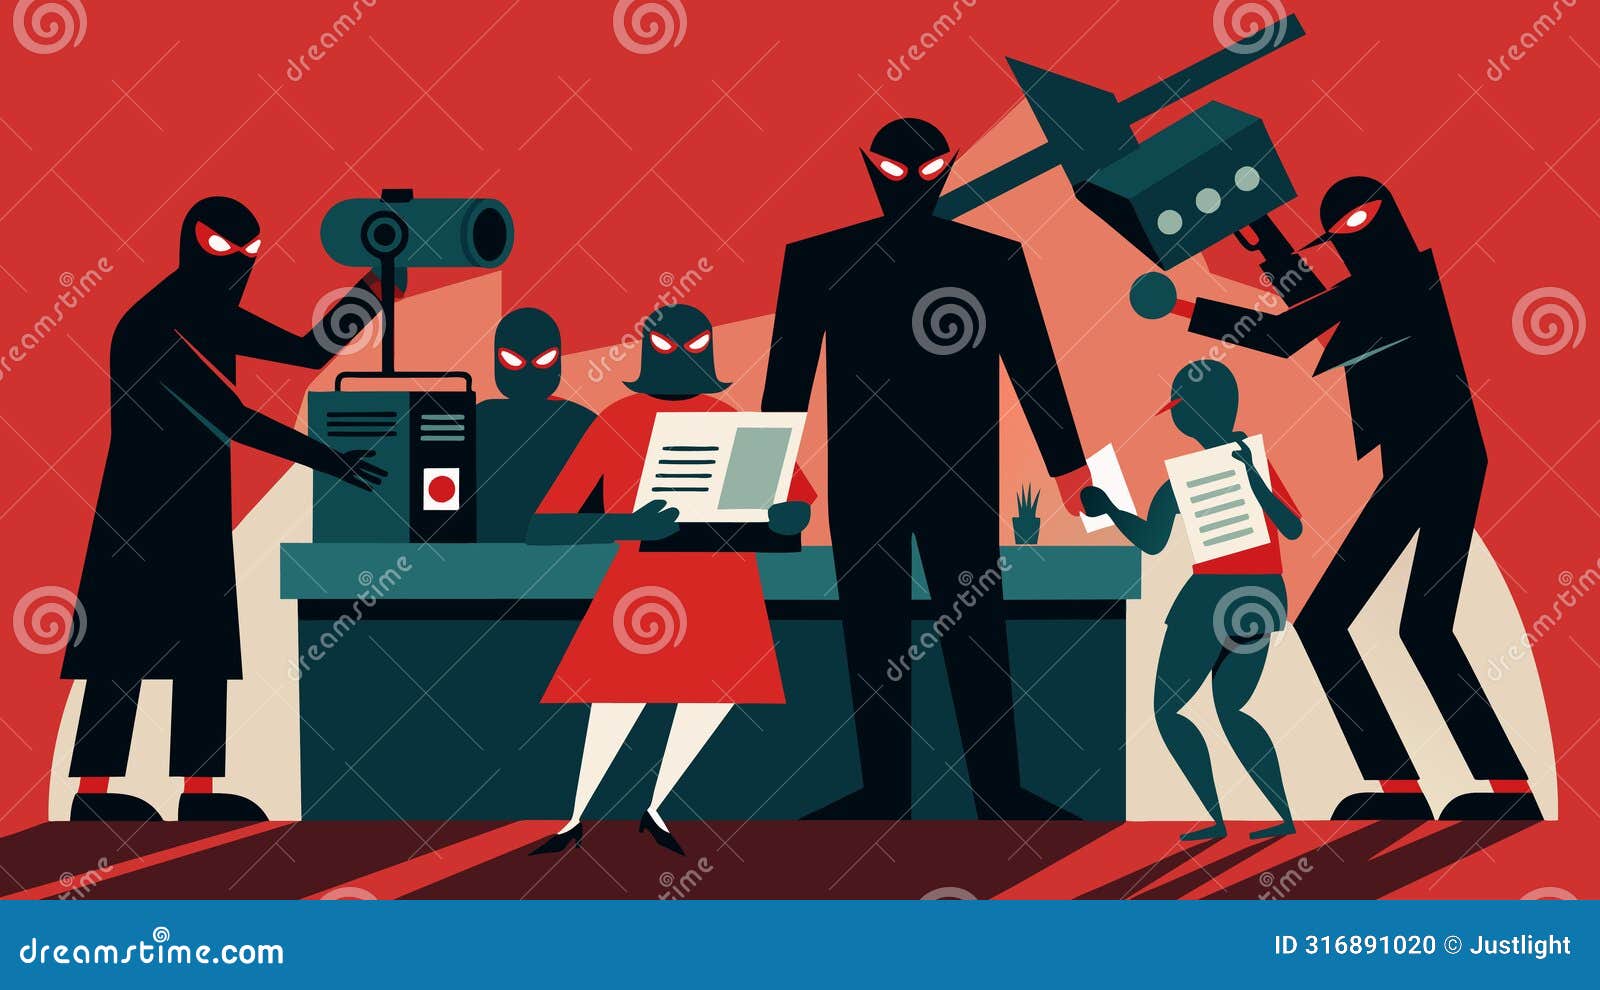 the shadowy figures operating the press seem almost robotic their movements precise and calculated as they manipulate